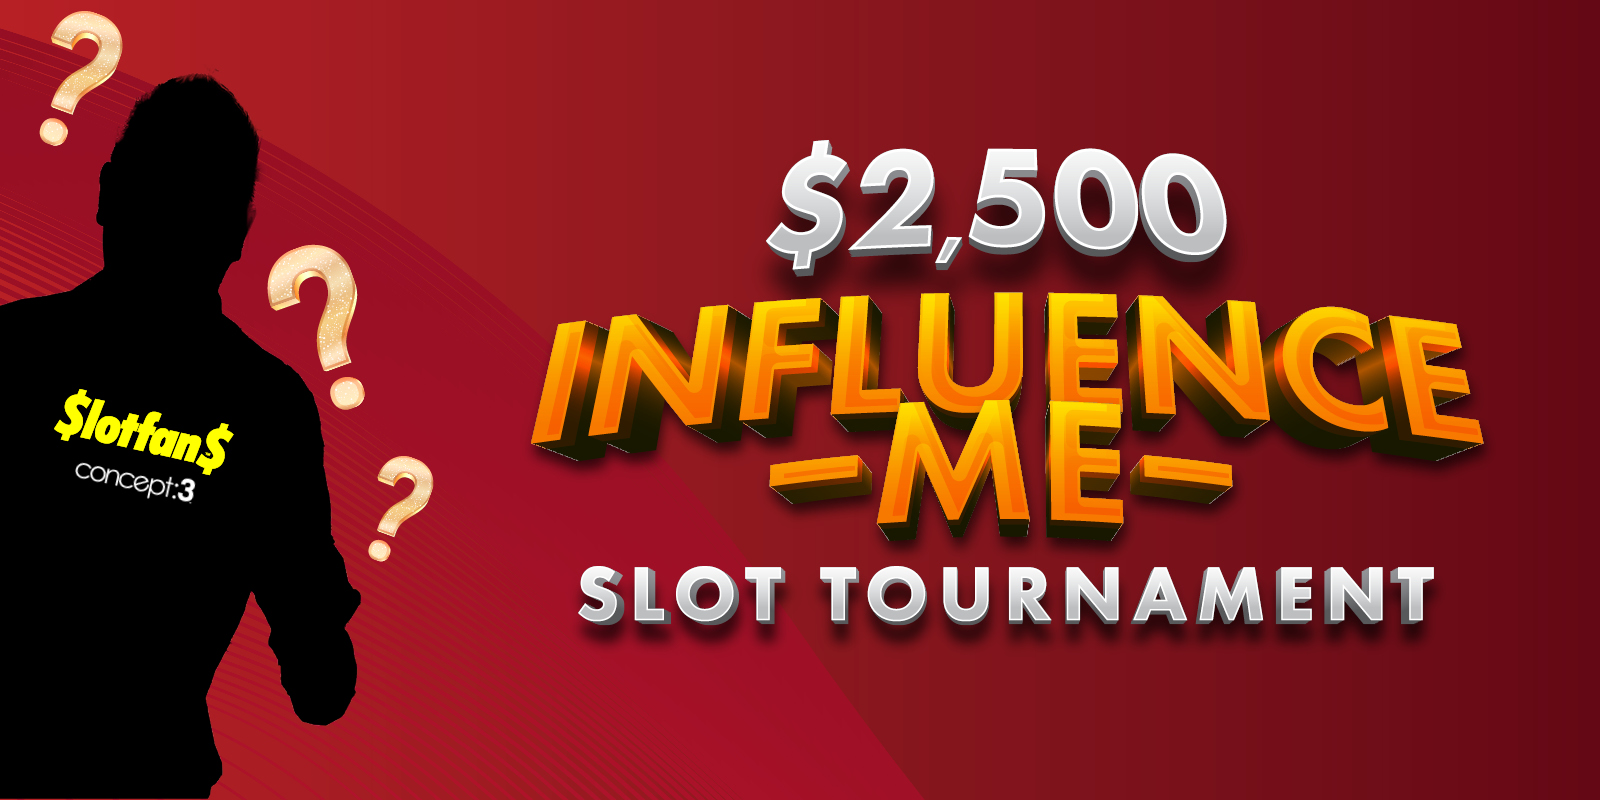 $2,500 Influence Me Slot Tournament decorative copy with a shadow caricature on the left side